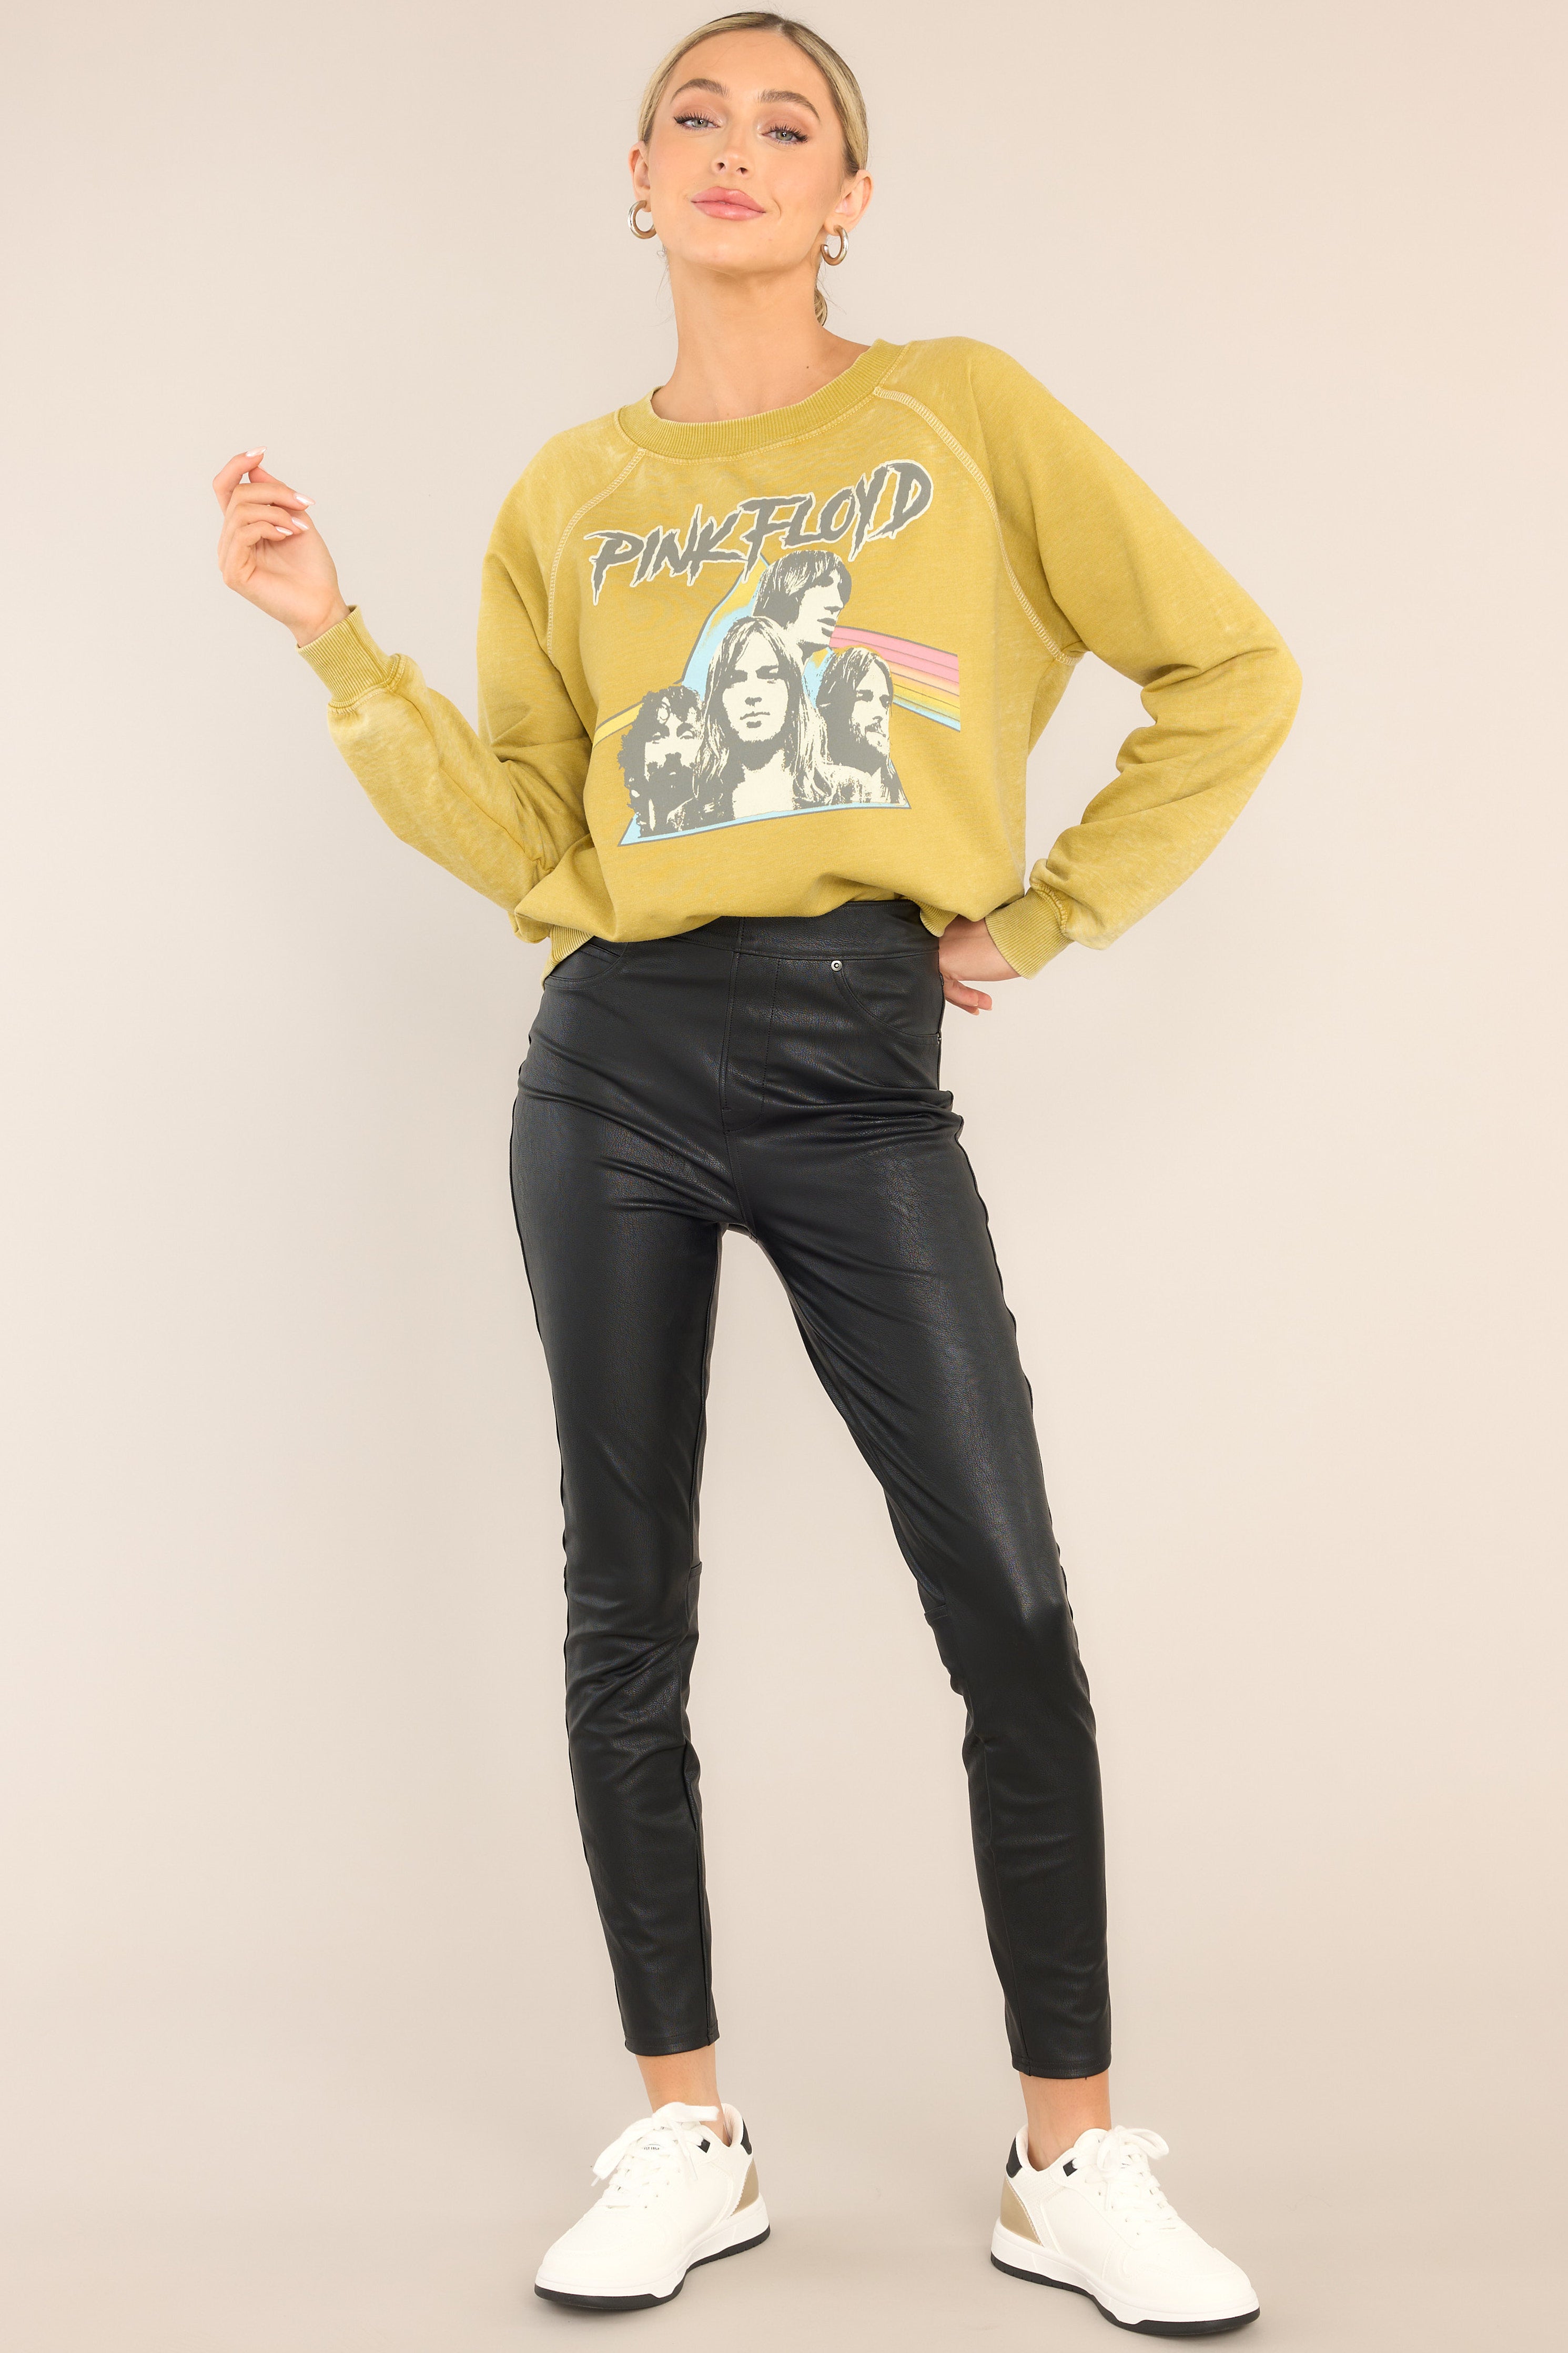 Full body view of this sweatshirt that features a ribbed crew neckline, exposed seams, graphic of the band members, 